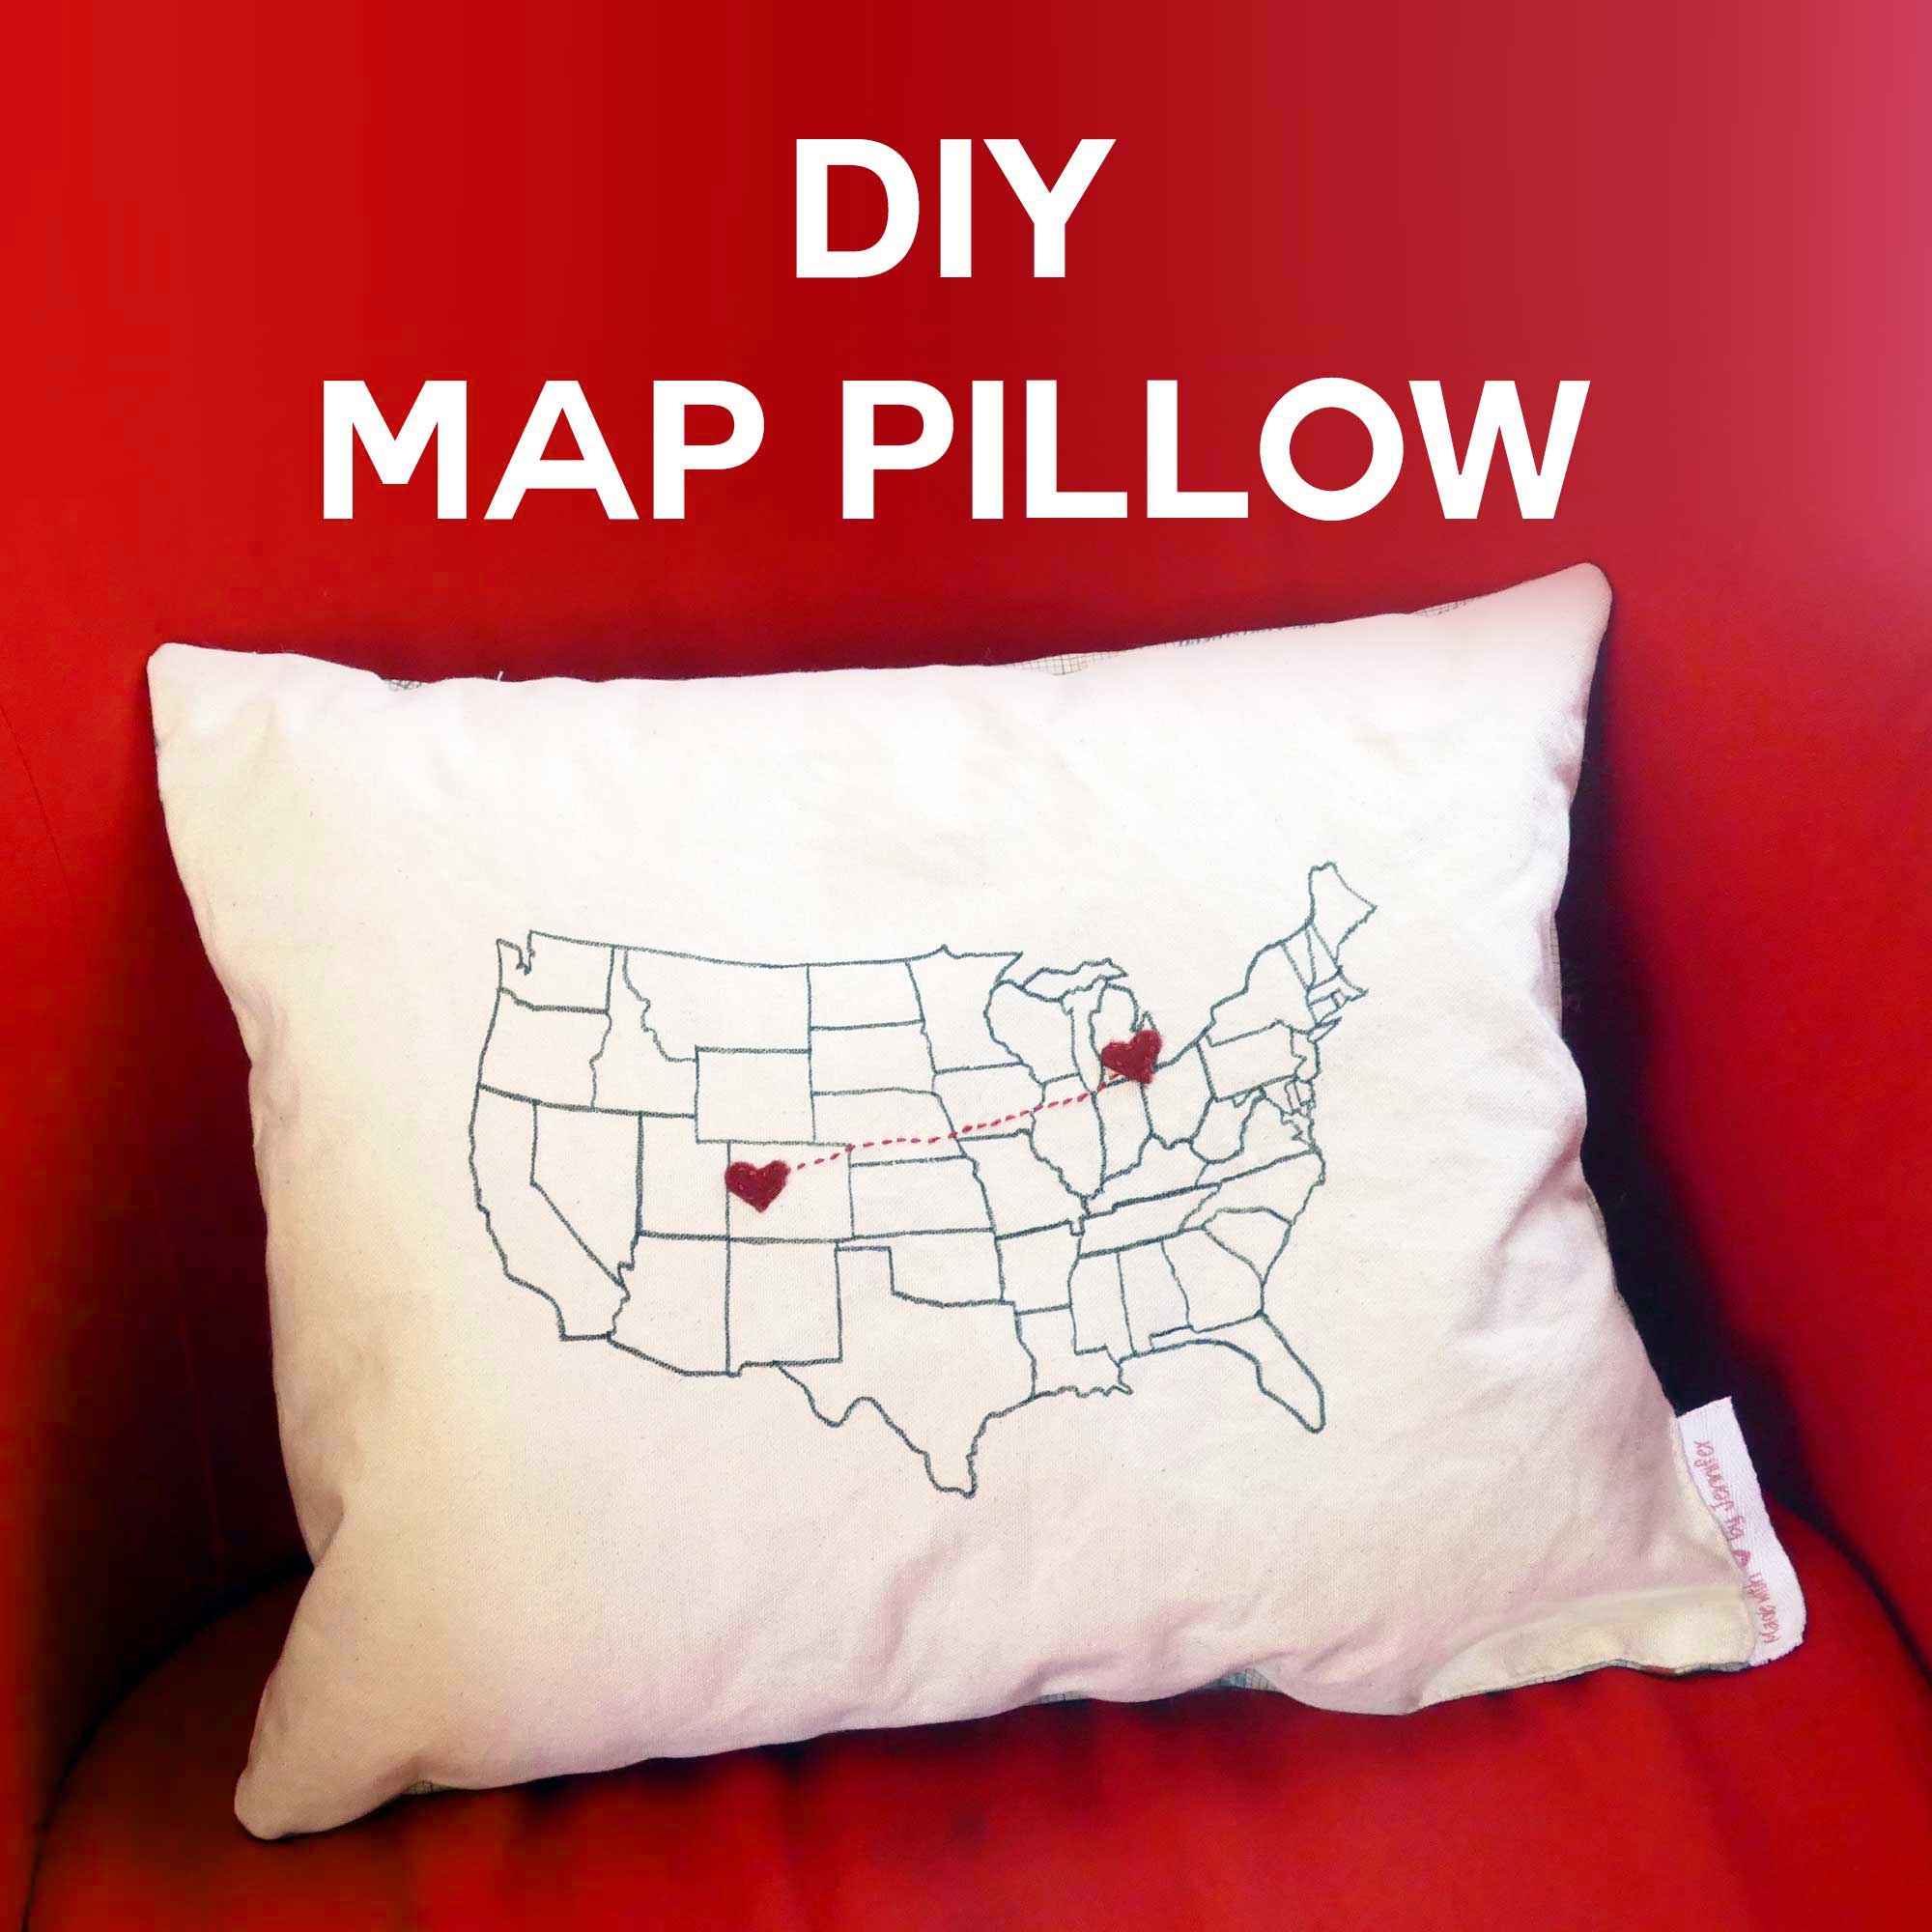 DIY Map Pillow with State-to-State Hearts